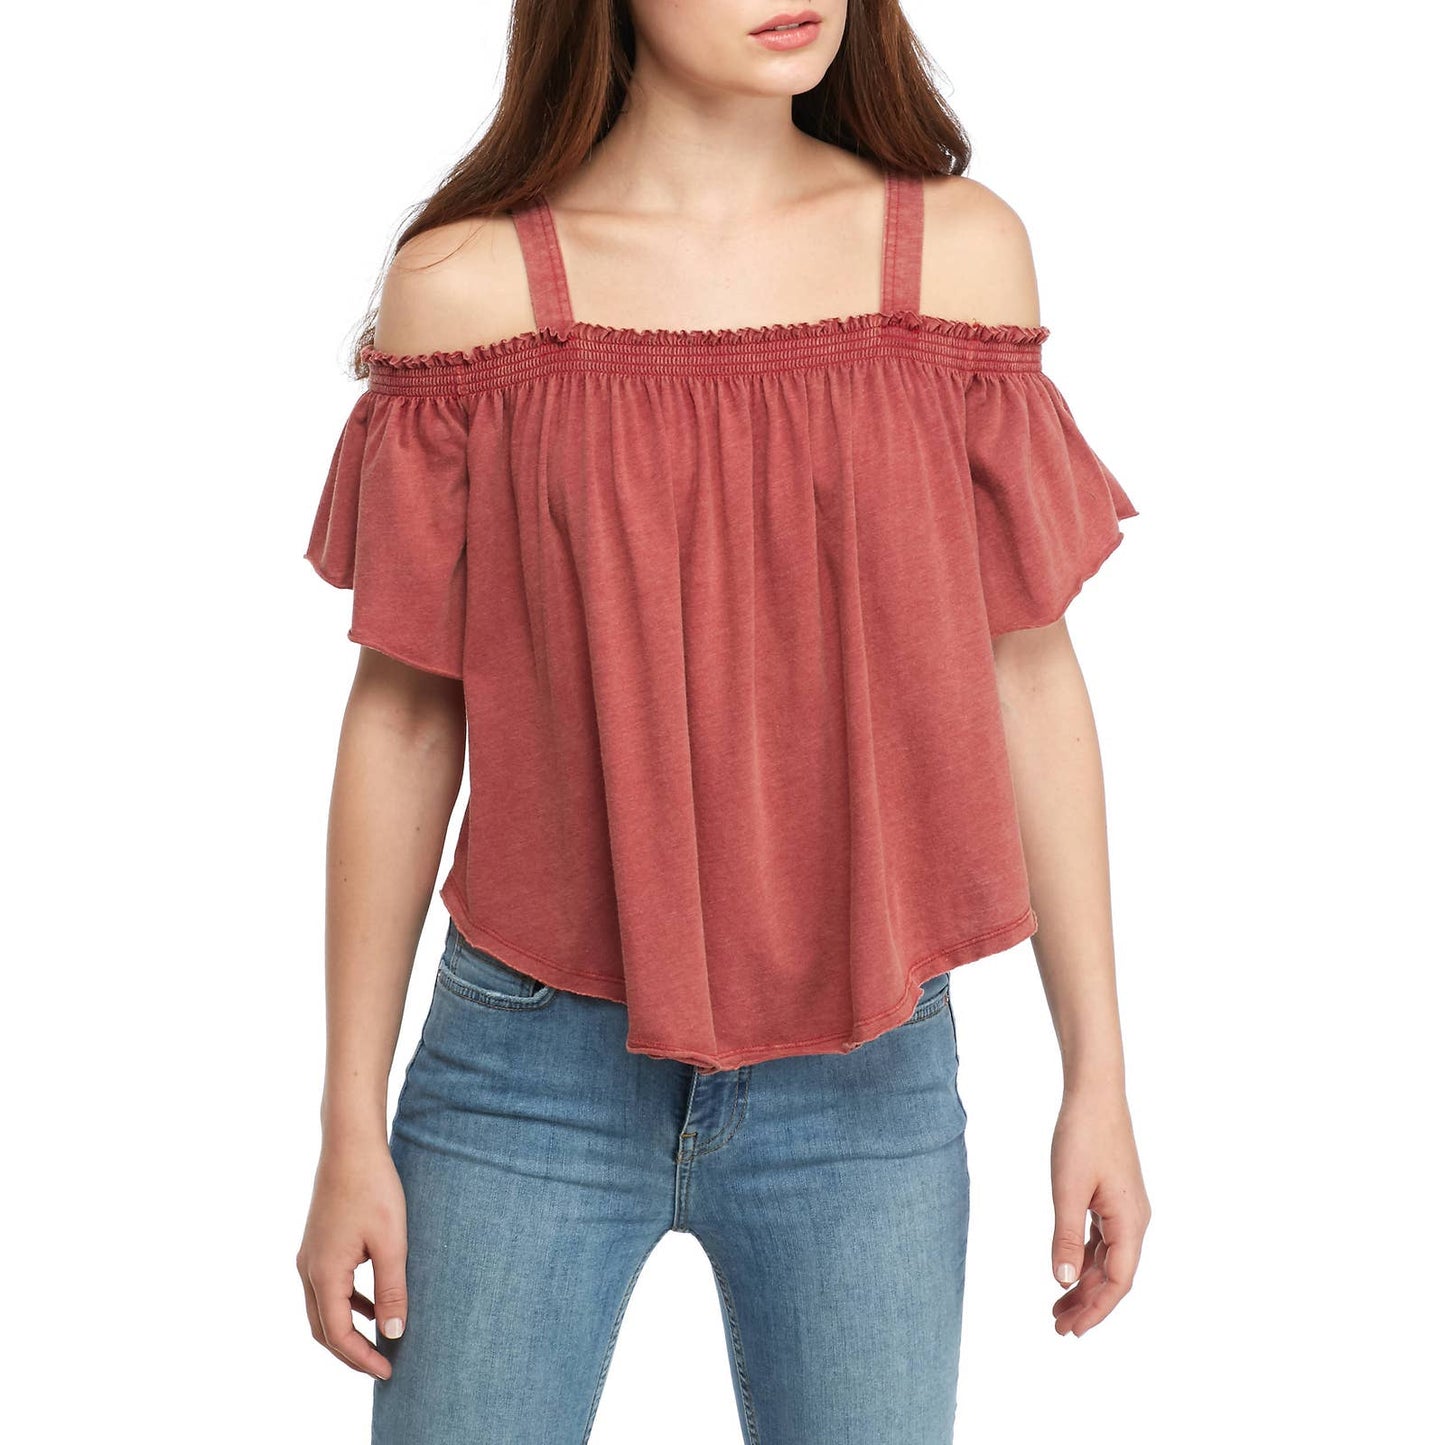 FREE PEOPLE Red Cold Shoulder Distressed Top Large NEW